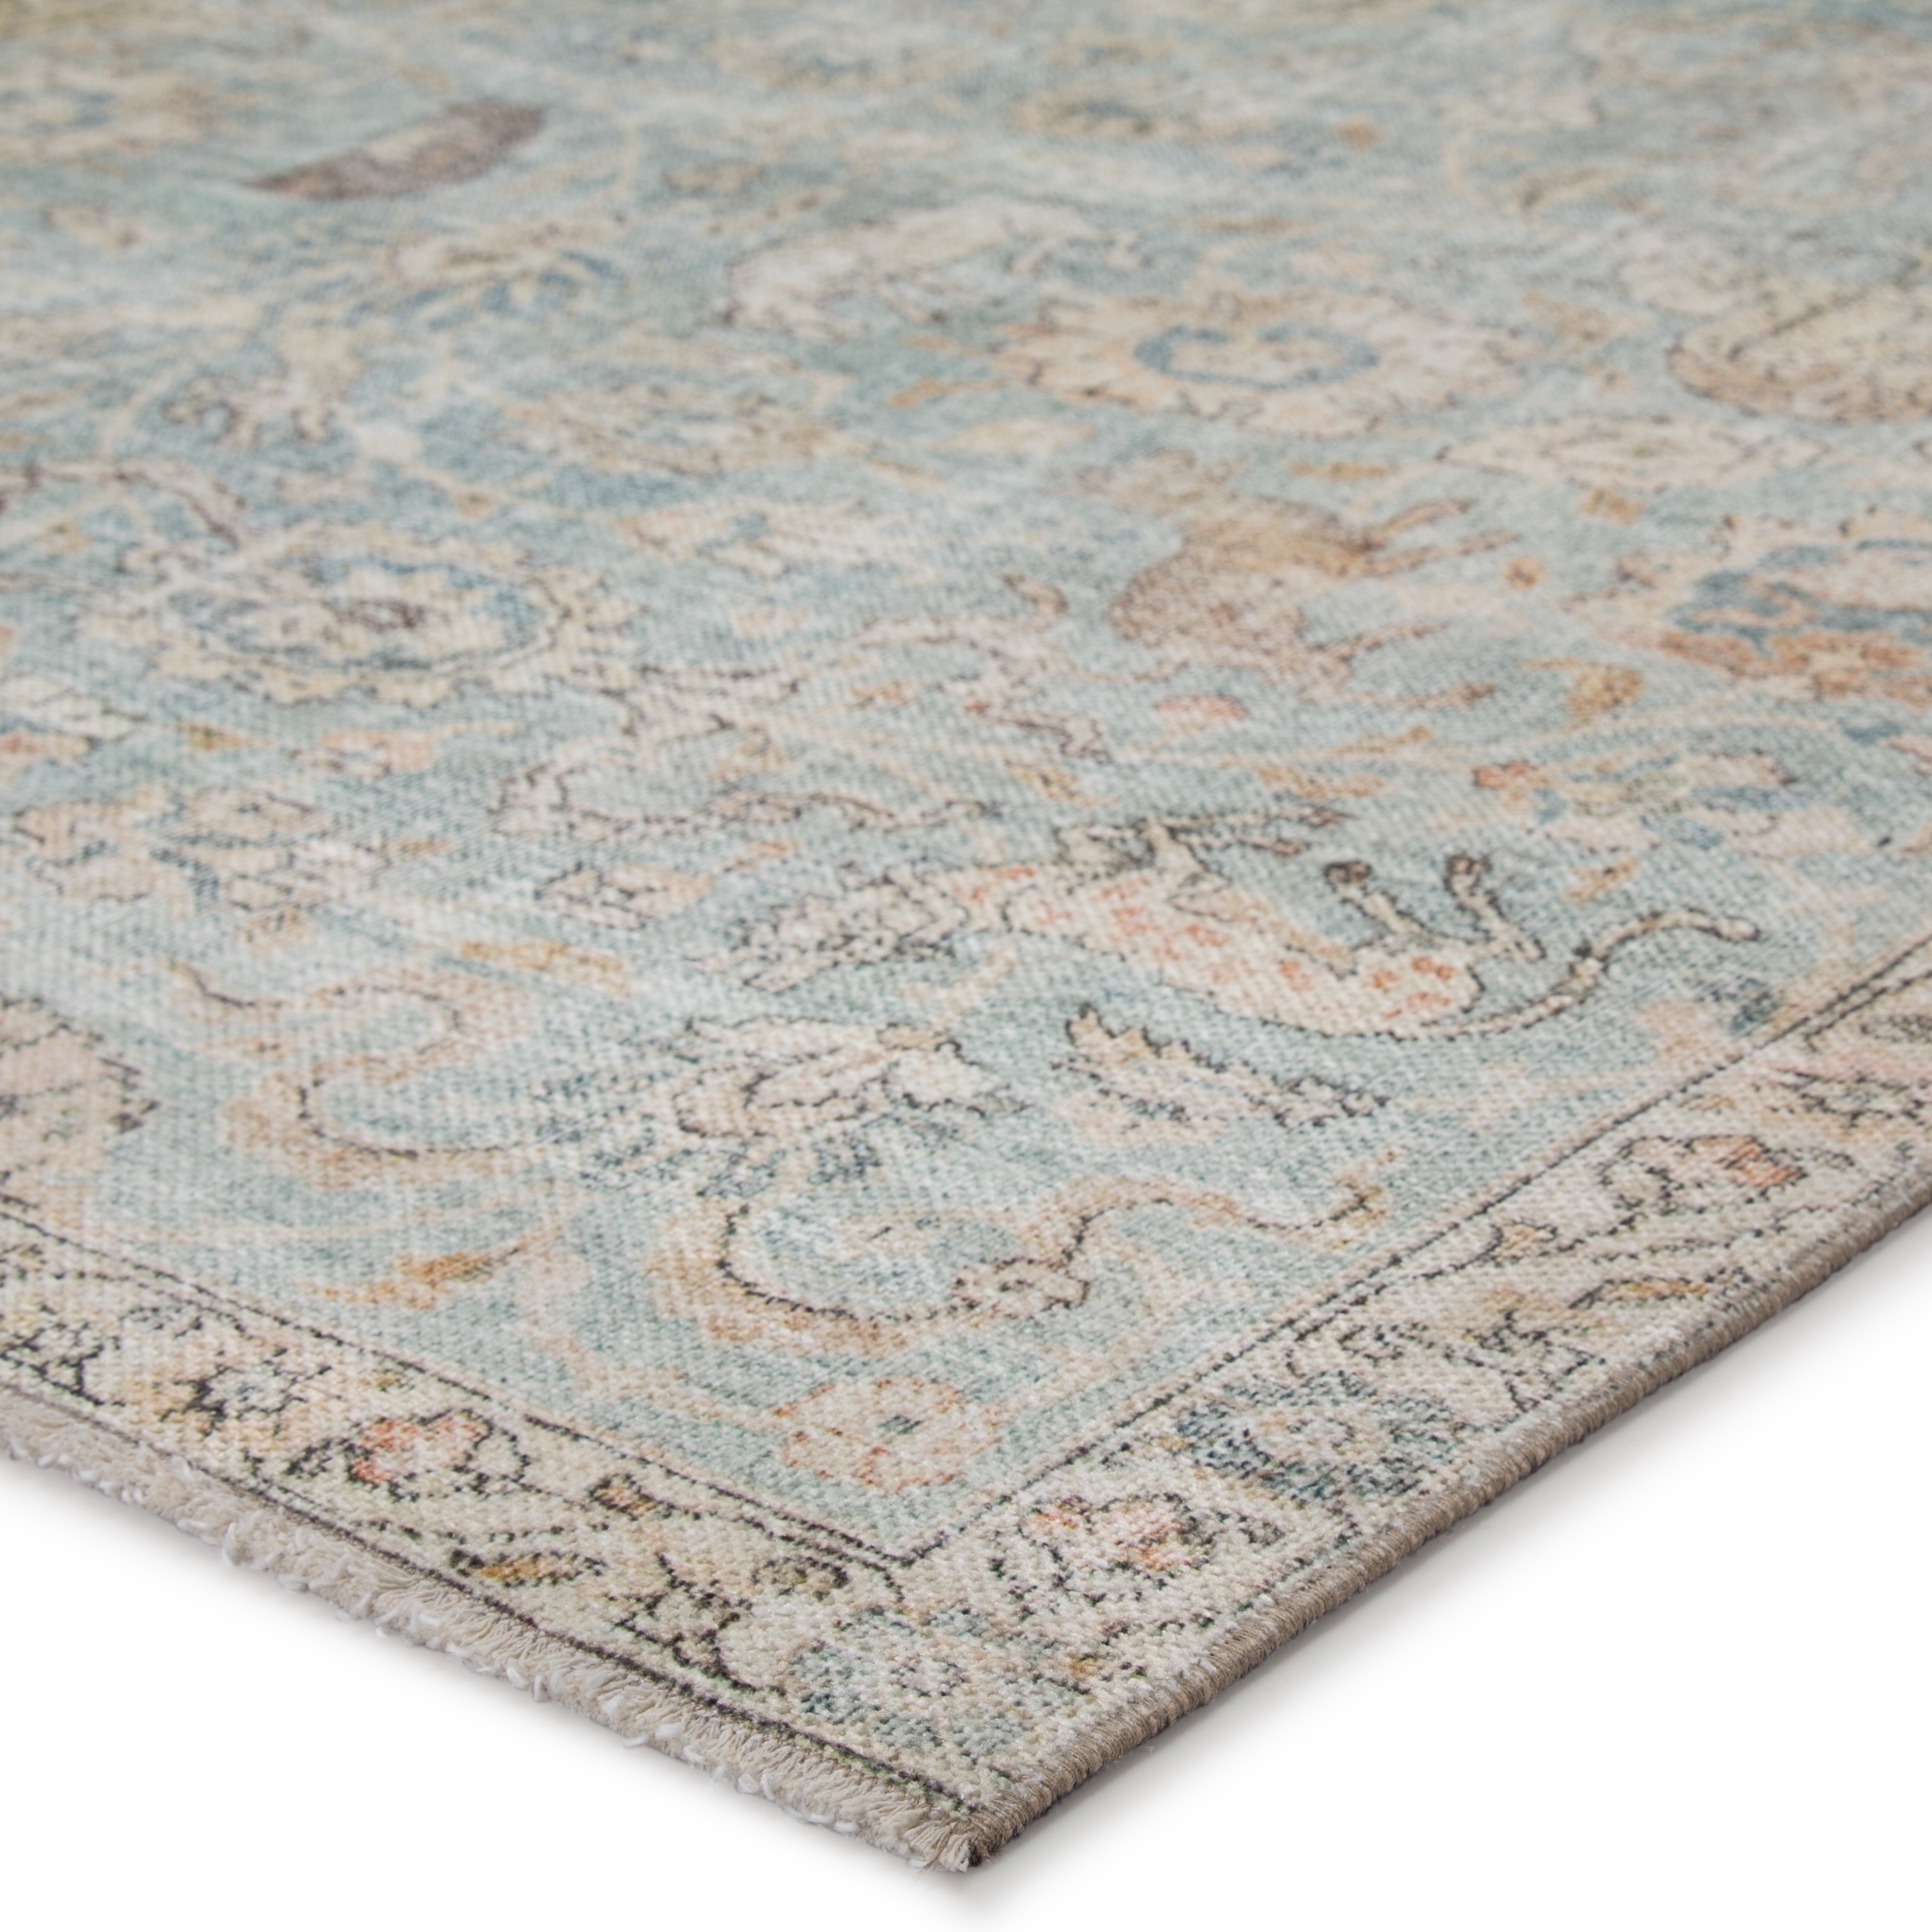 Stag Oriental Teal/ Gold Area Rug (5'X8') - Image 1